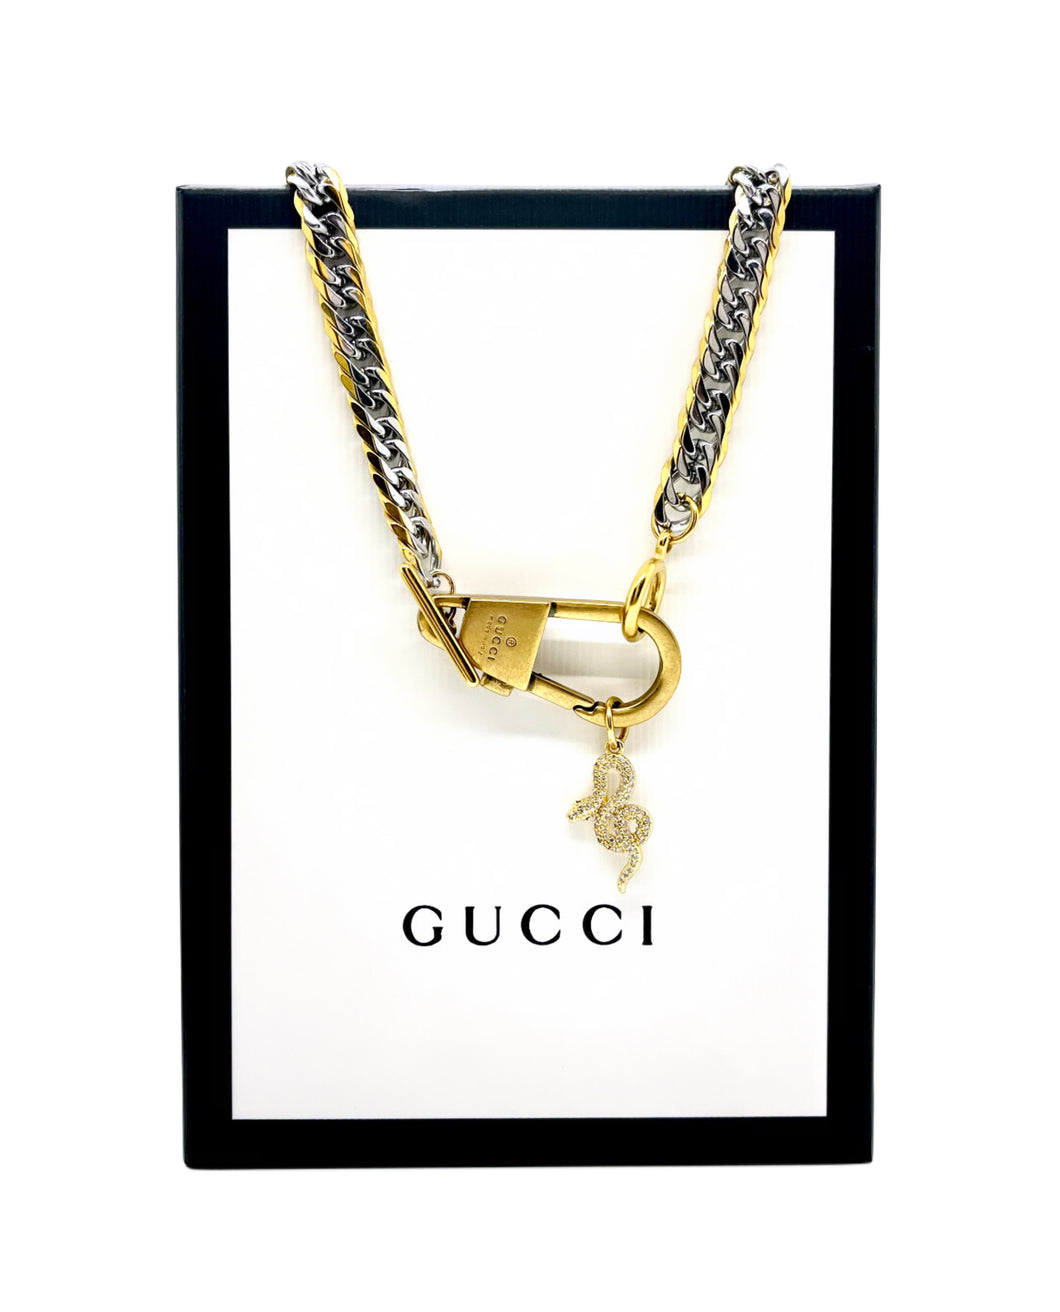 Repurposed Gucci Keychain Clasp & Removable Snake Charm Necklace